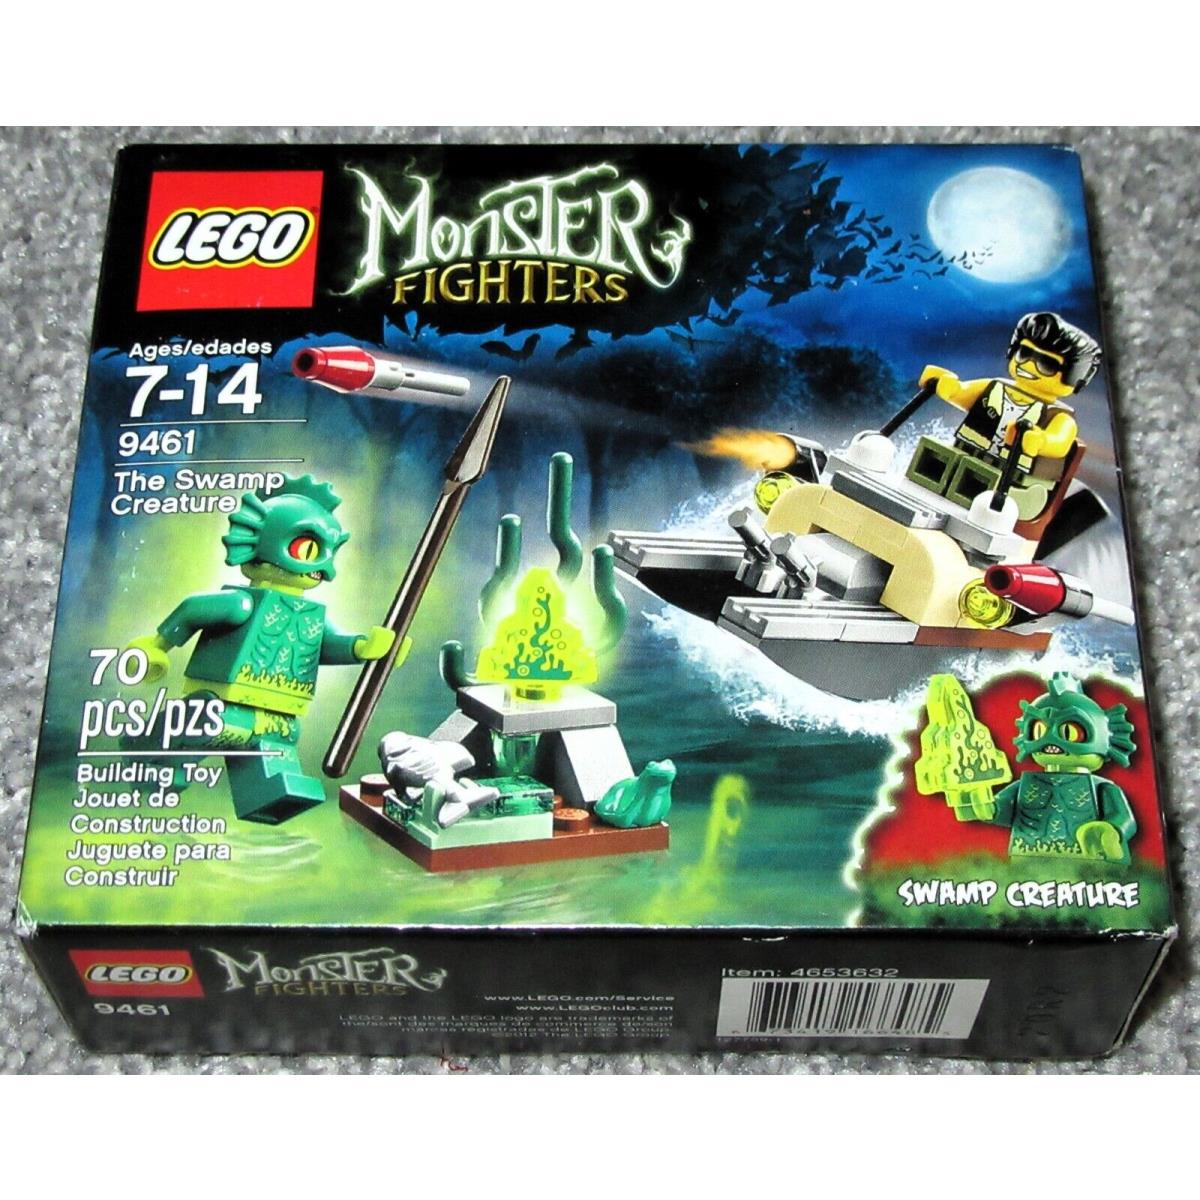 Lego Monster Fighters 9461 The Swamp Creature Nisb Moonstone Swamp Boat - 